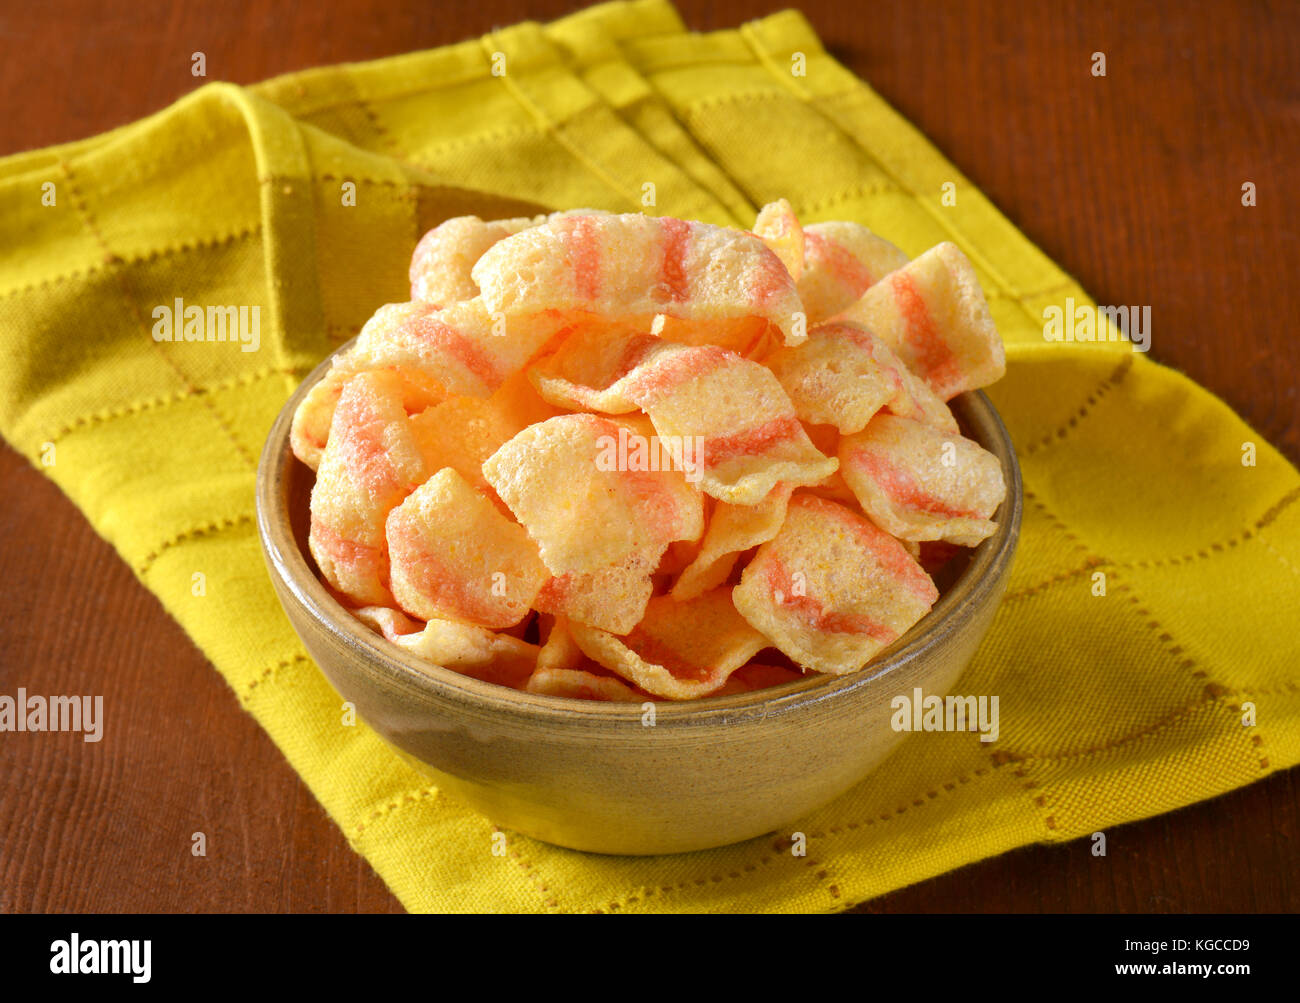 Bowl of bacon-flavored puffed wheat chips Stock Photo